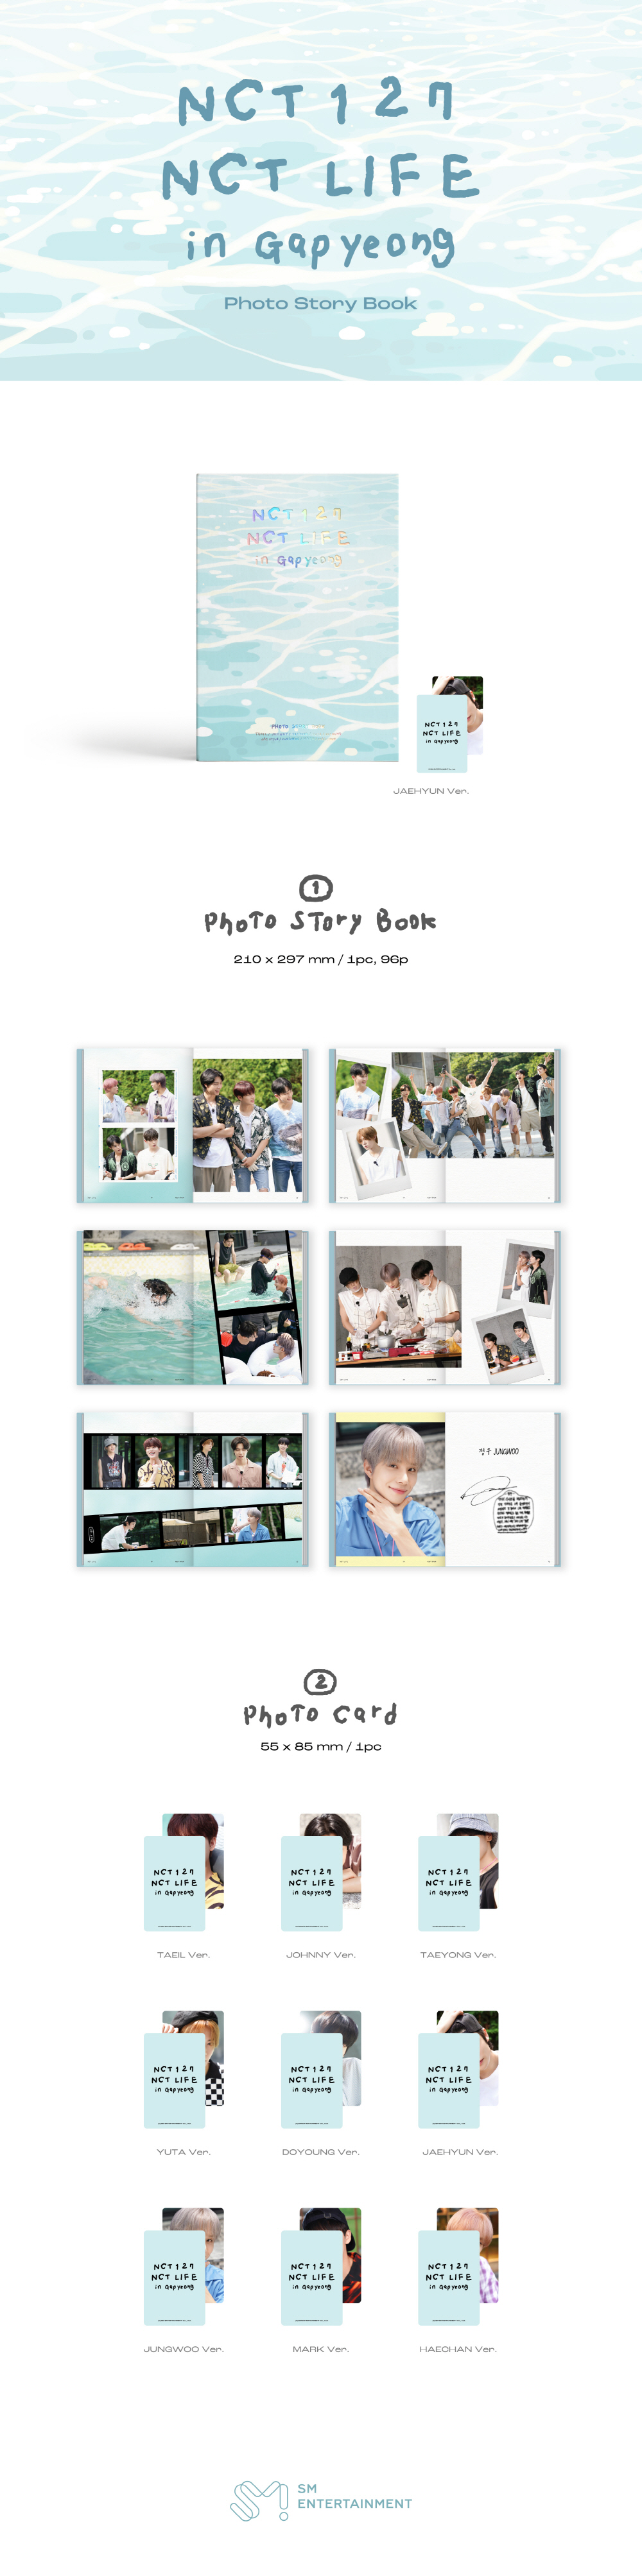 NCT 127 [NCT LIFE in Gapyeong] PHOTO STORY BOOK (MARK) nct127 photobook NCT127Gapyeong NCTLIFE Gapyeong NCT127photobook NCT127photostorybook